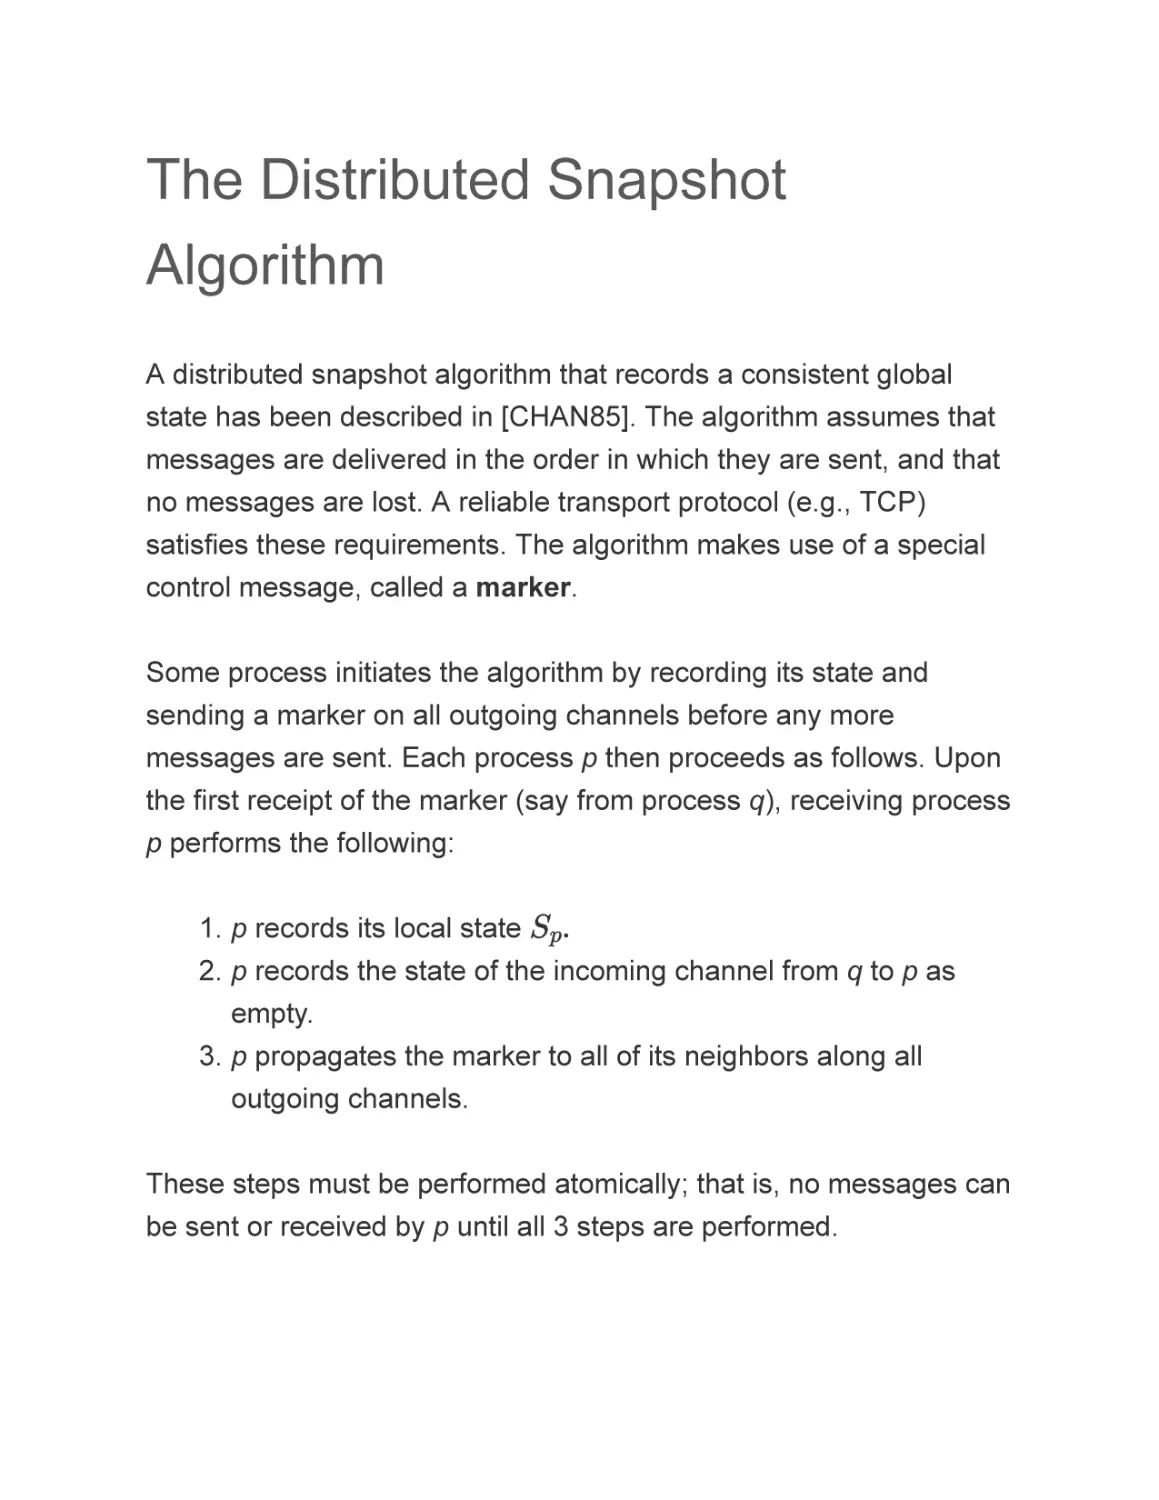 The Distributed Snapshot Algorithm